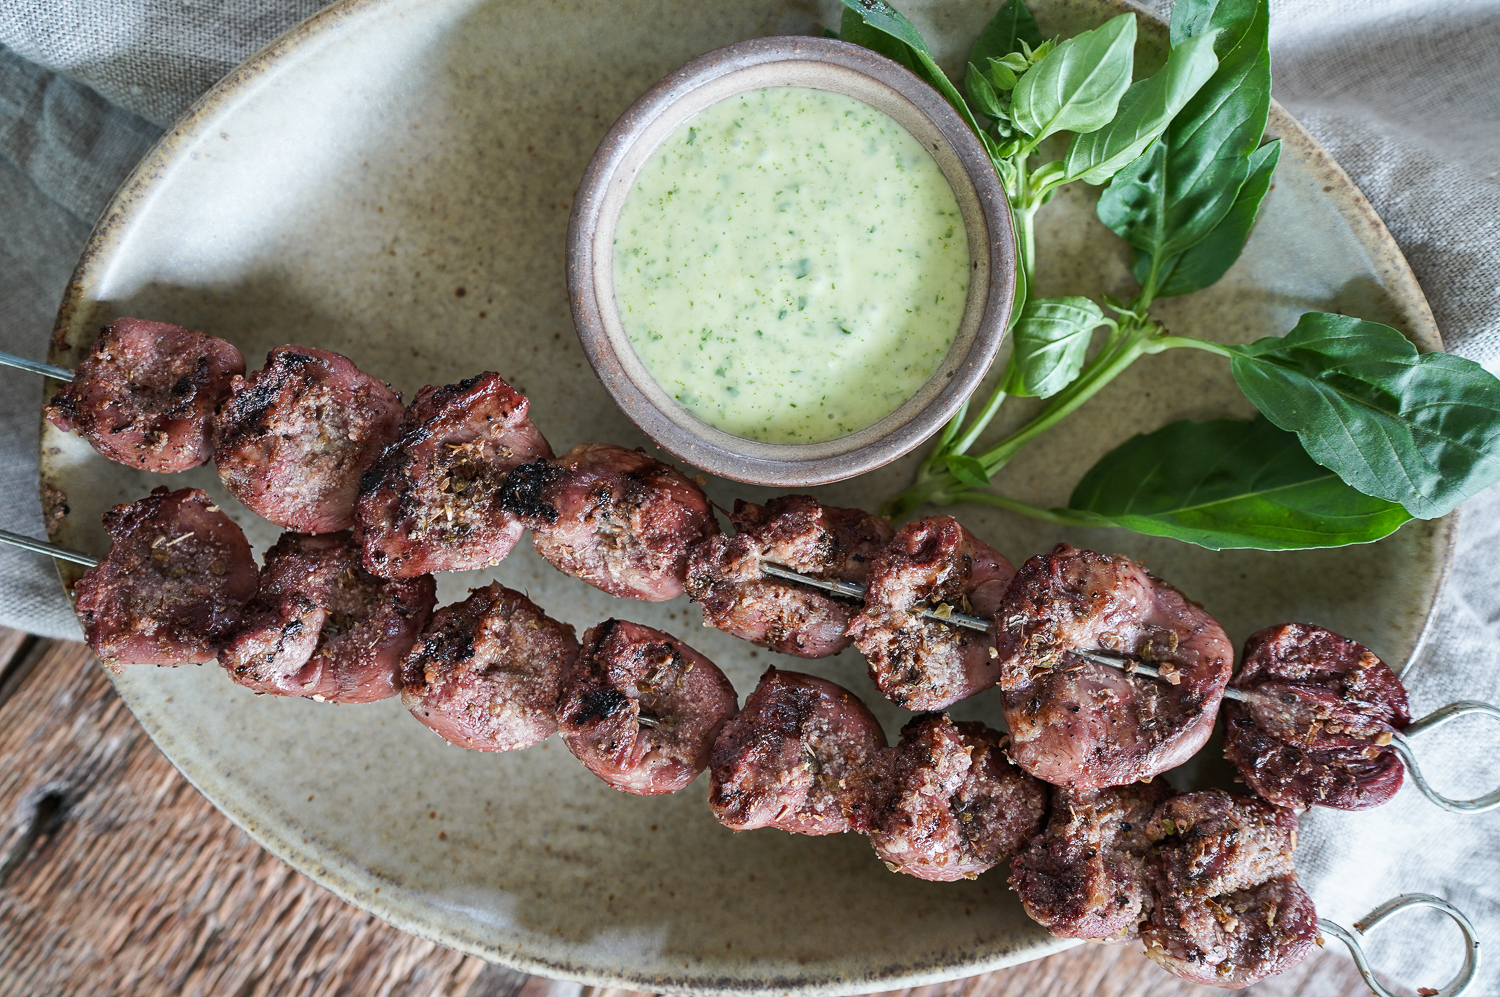  grilled chicken hearts on skewer with a green sauce on side